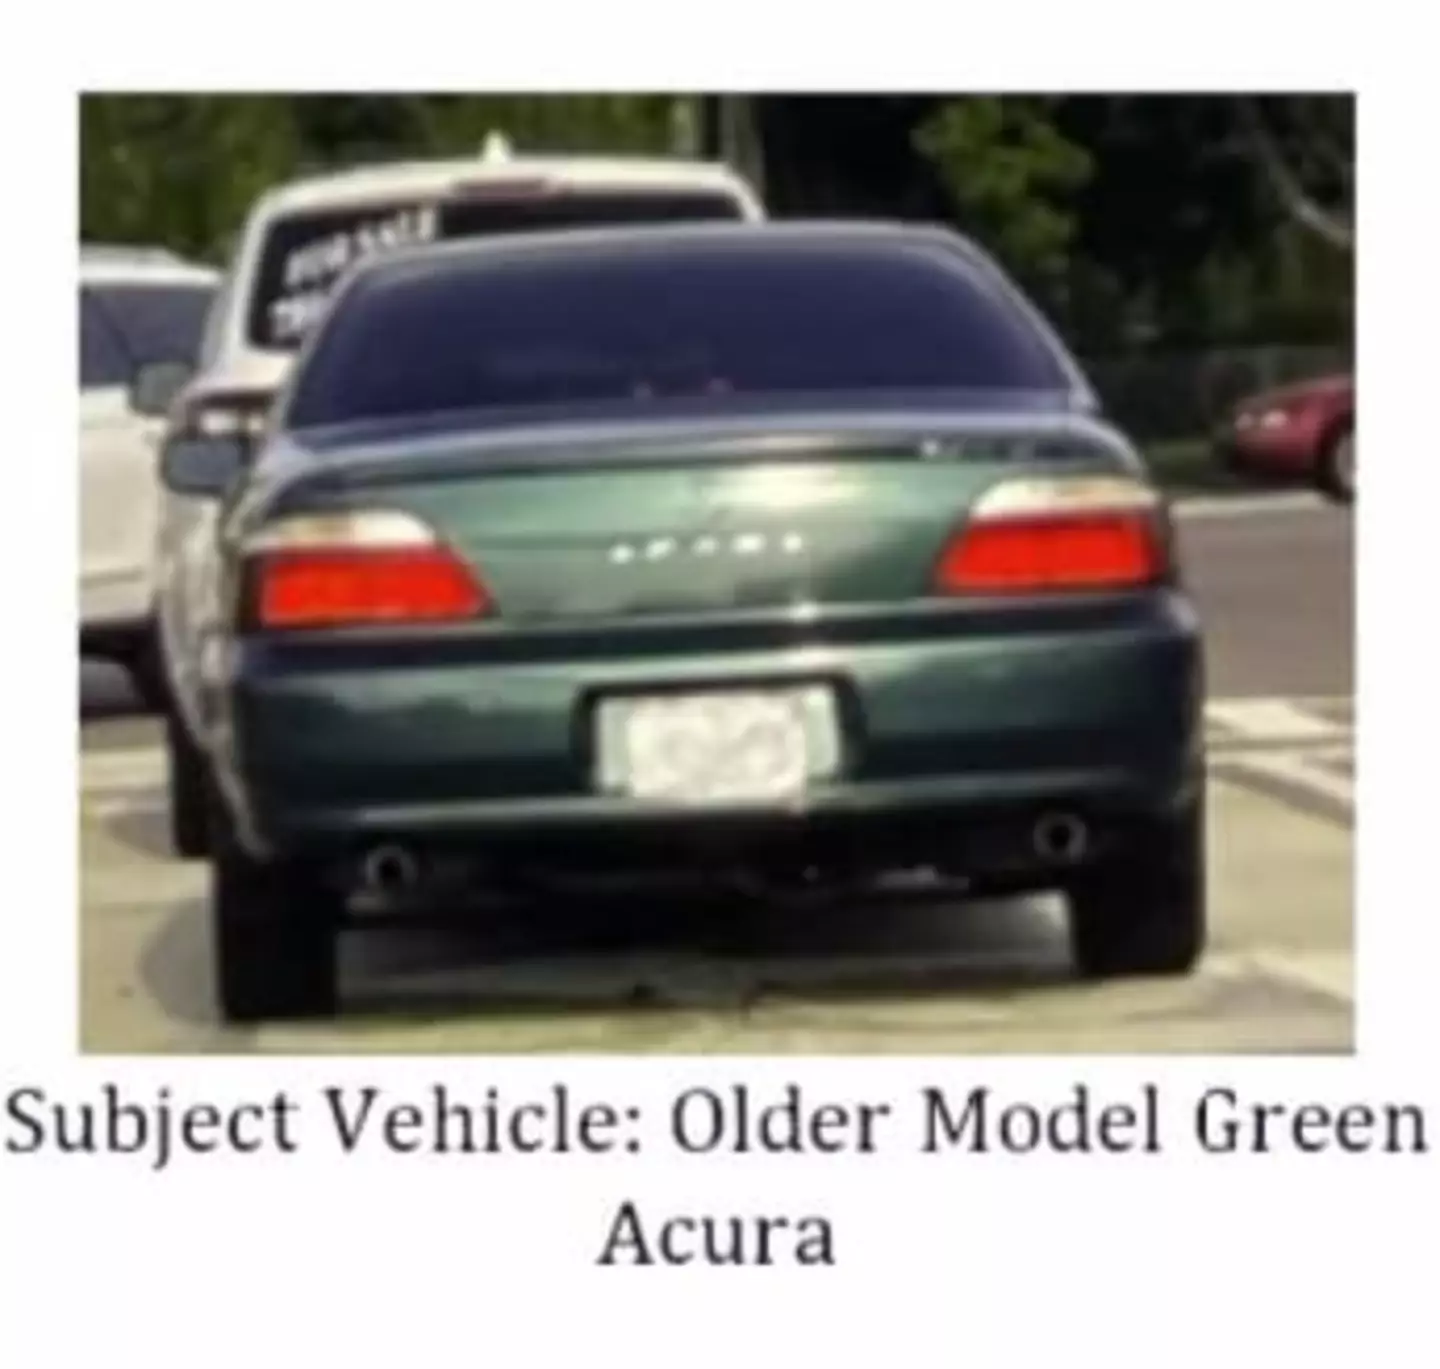 Authorities are still appealing for any information about those in the Acura. (Facebook/Seminole County Sheriff's Office) 